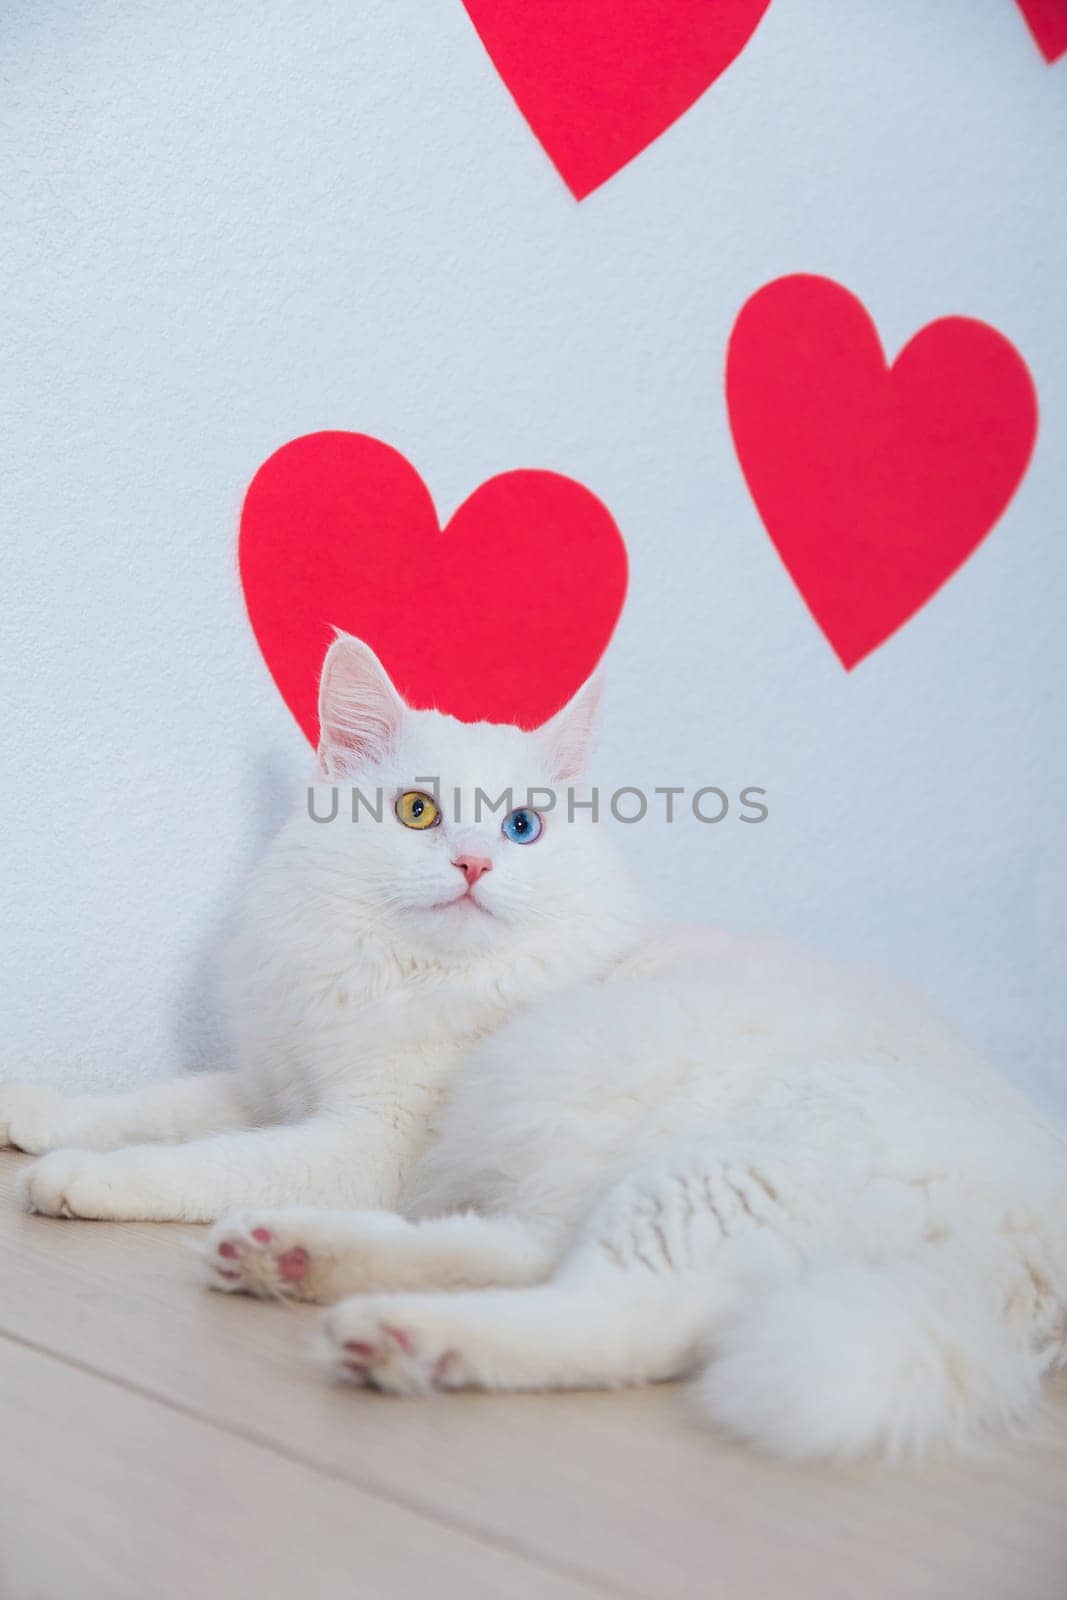 A white fluffy Angora cat with multicolored eyes lies impressively against the background of hearts by ElenaNEL